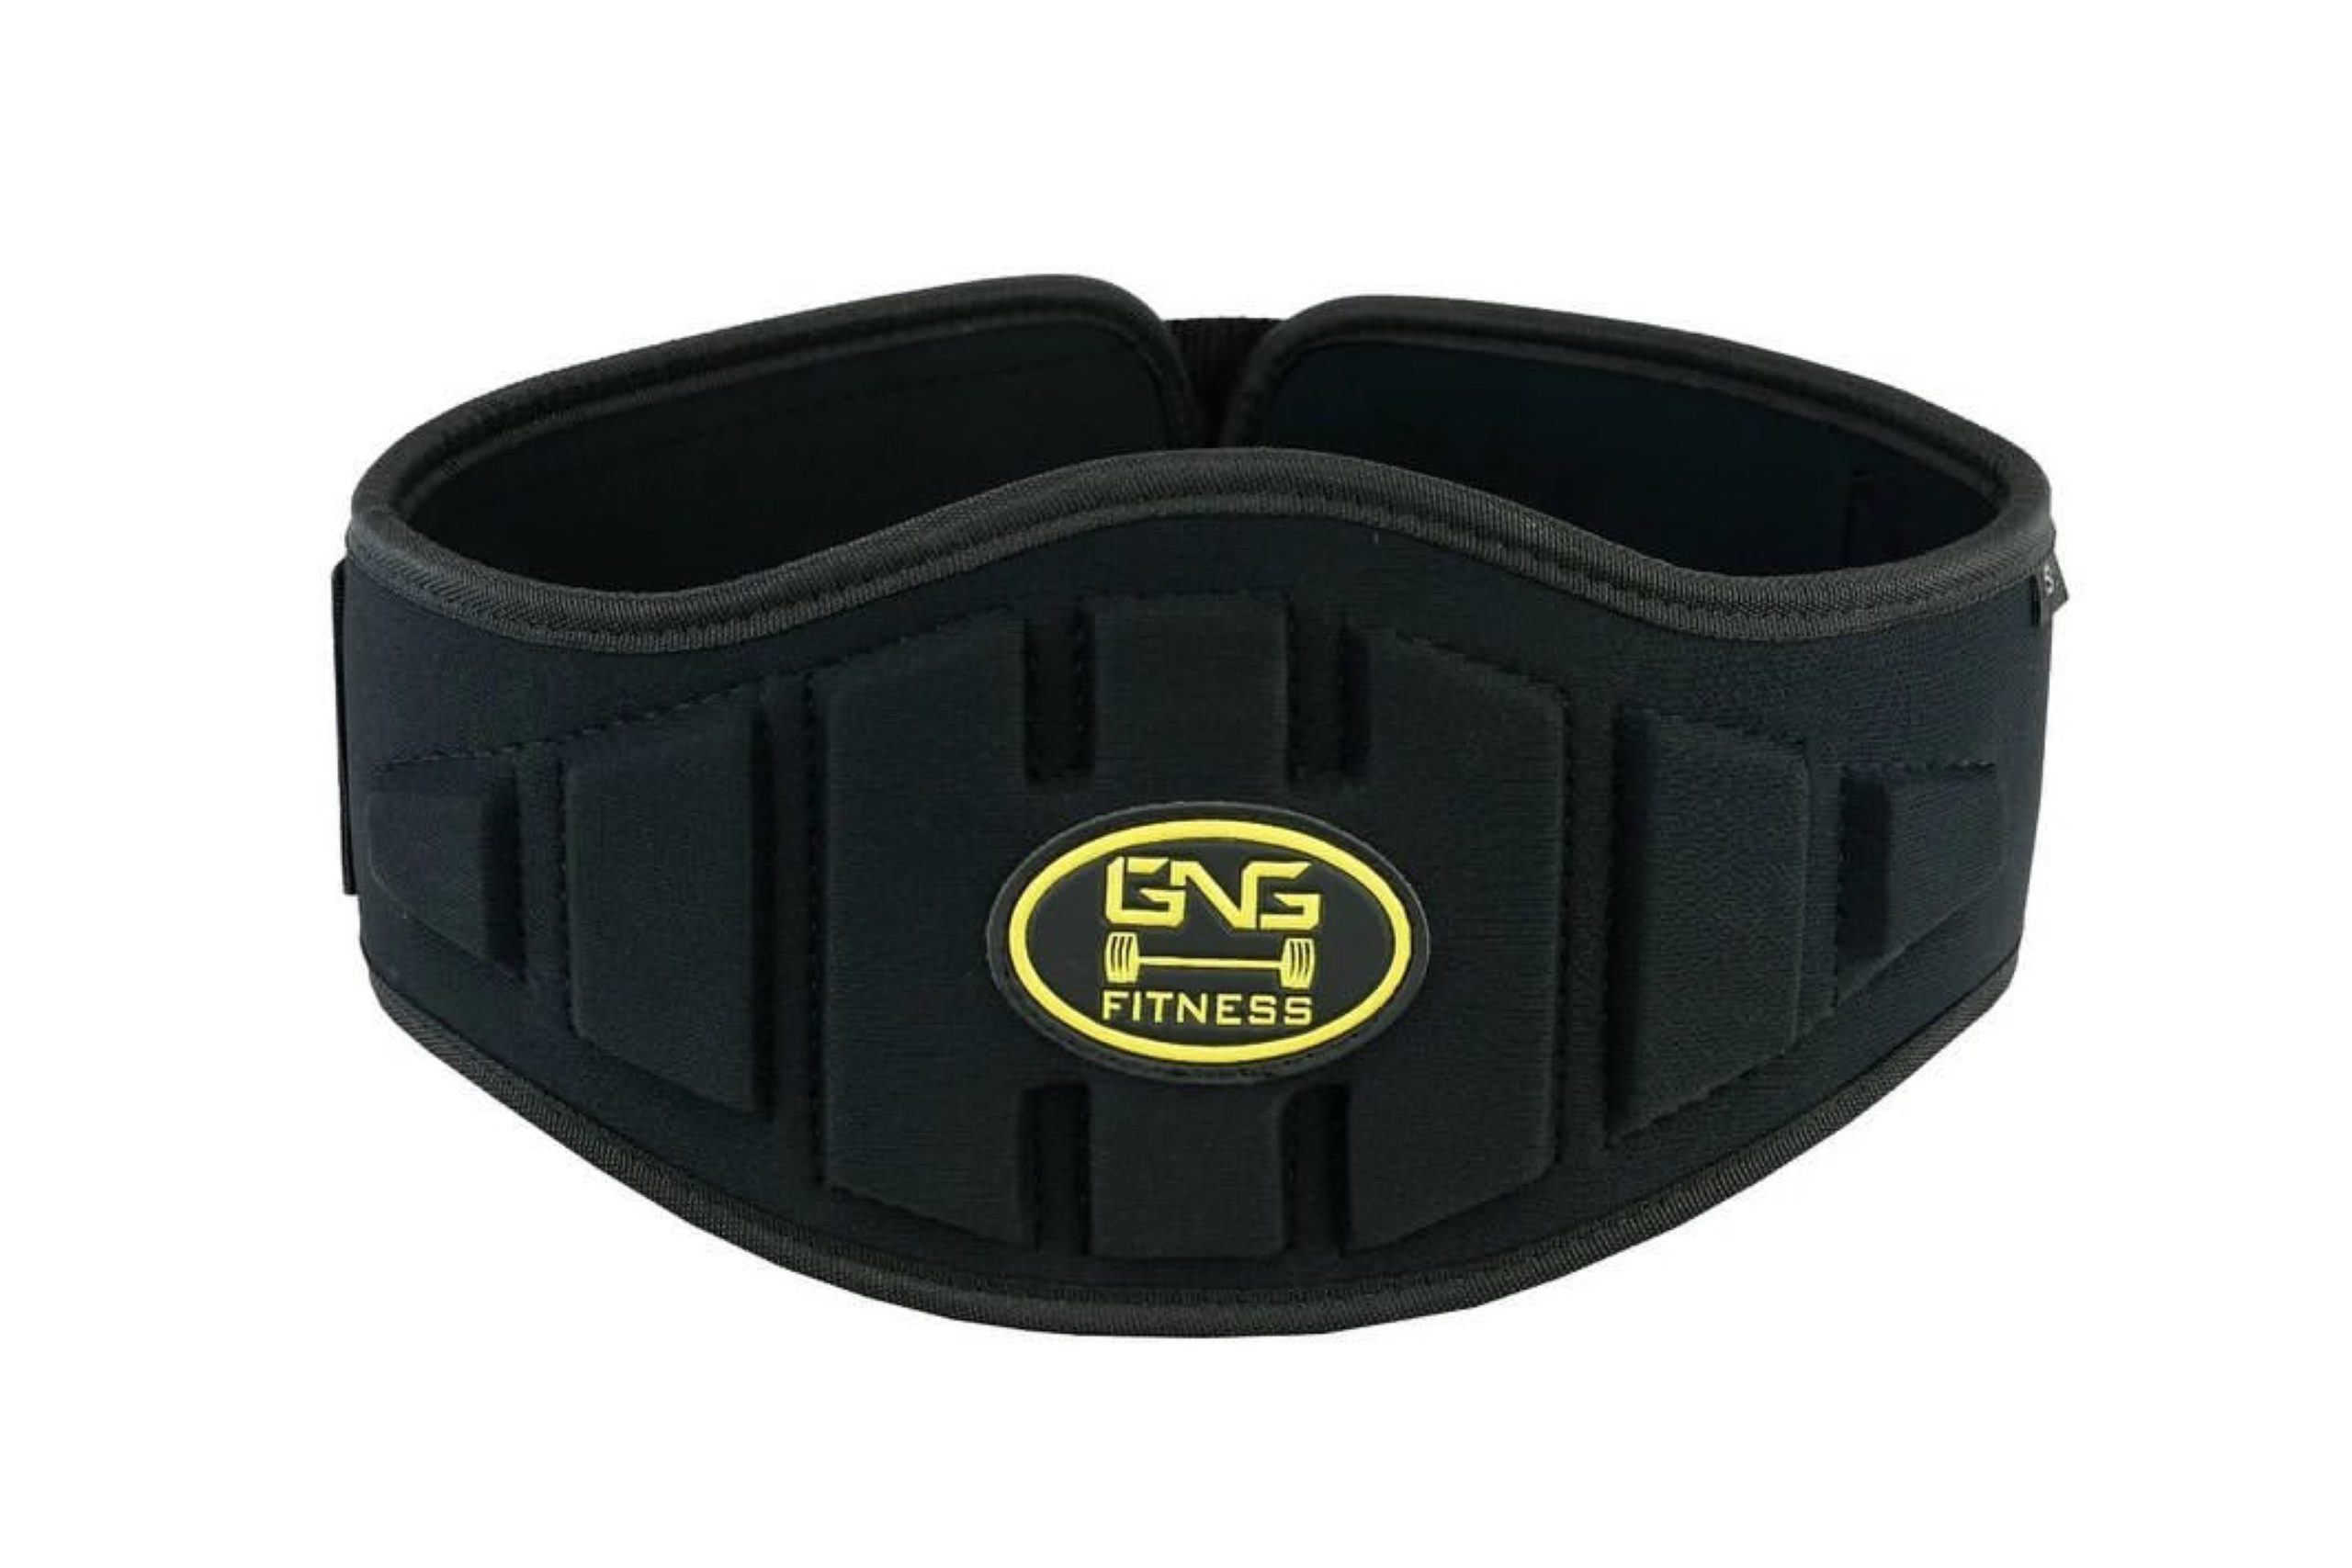 GNG Weight Lifting Belt for Gym Fitness Training – Neoprene Padded Double Belt with 4” Lumbar Back Support – Great for Bodybuilding, Functional Training, Powerlifting, Deadlifts Workout & Squats